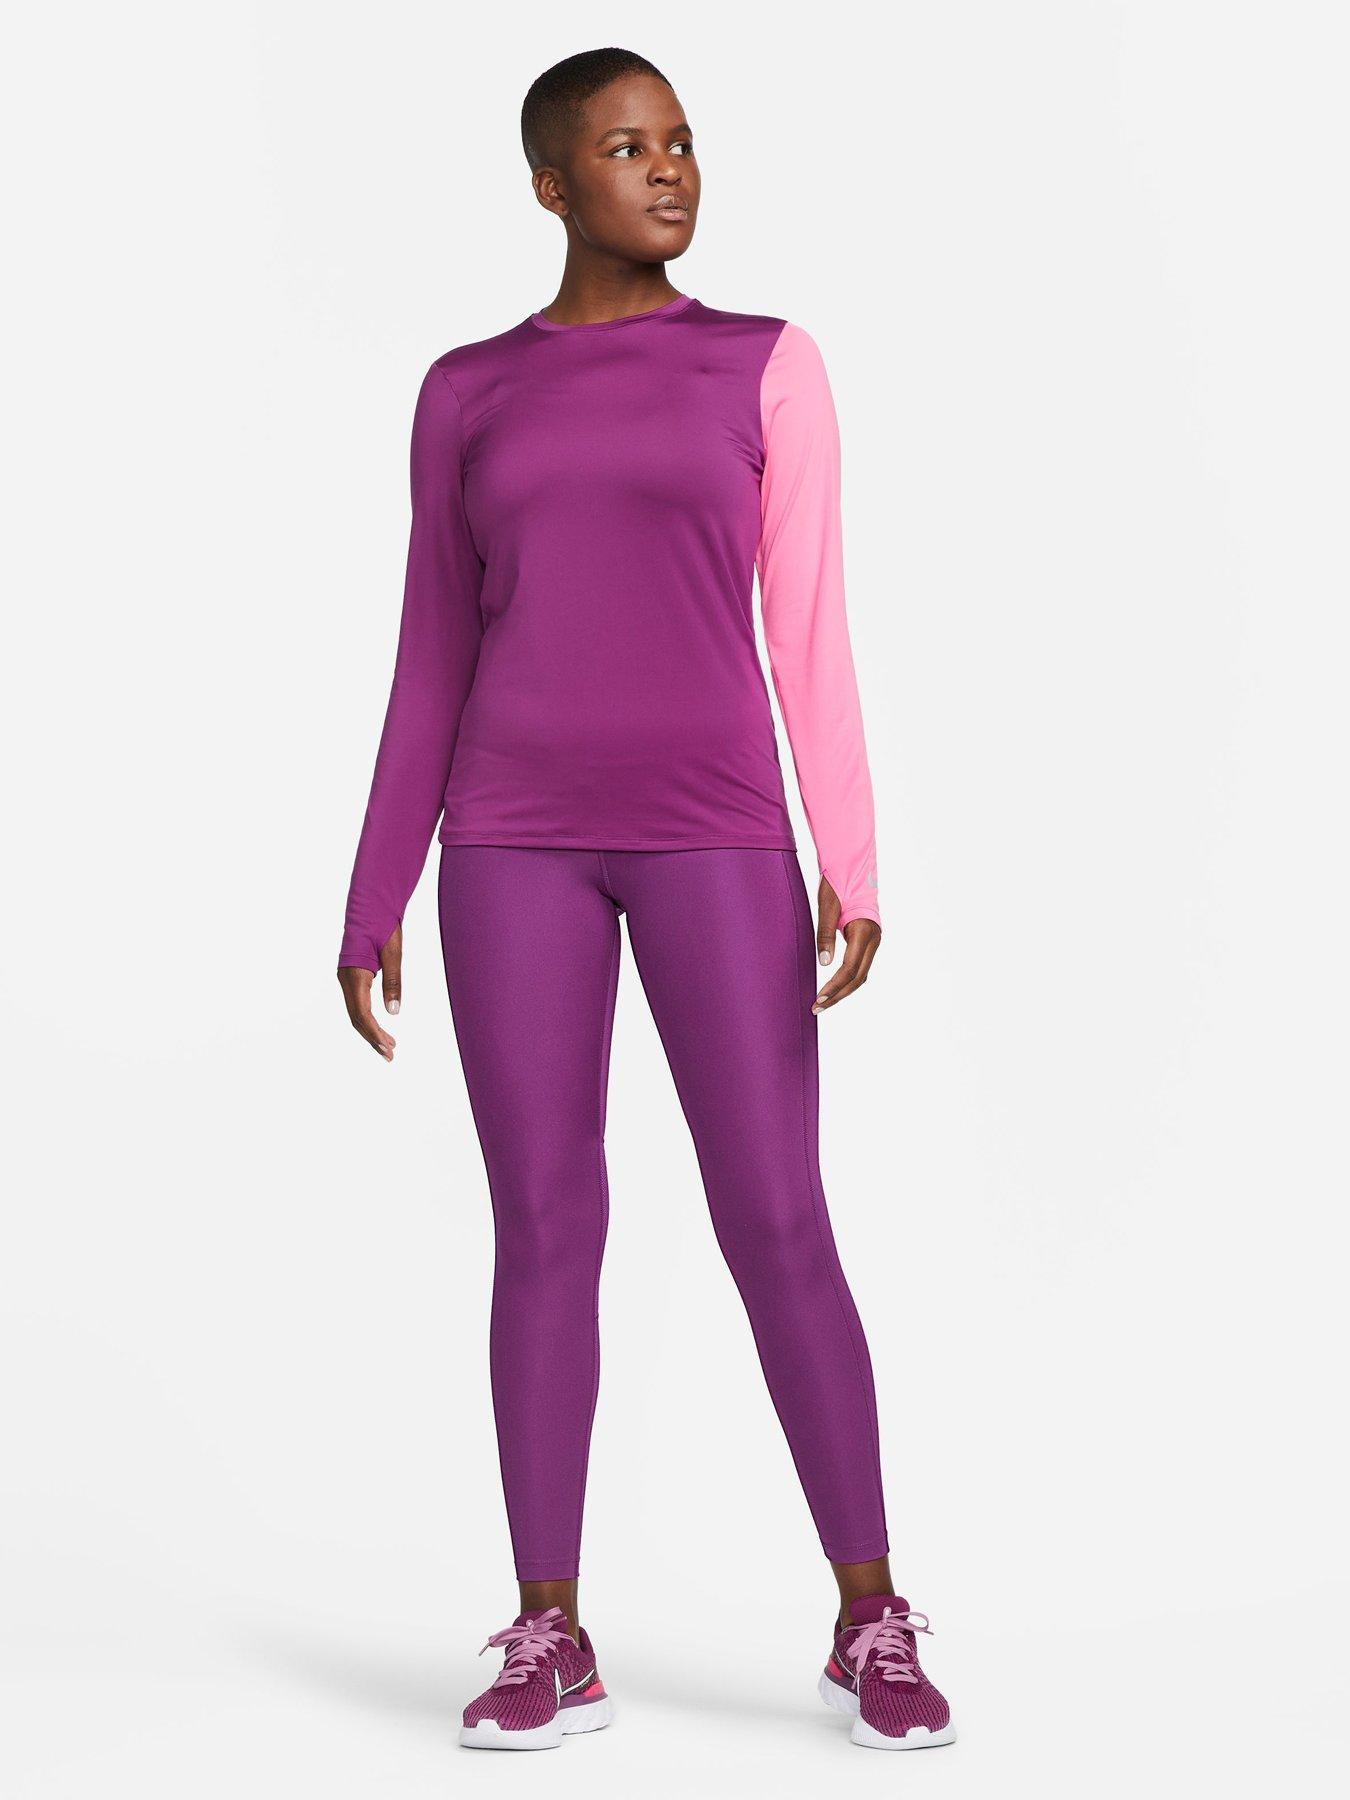 NIKE Dri-Fit Knee Length Tights, Women's Fashion, Activewear on Carousell